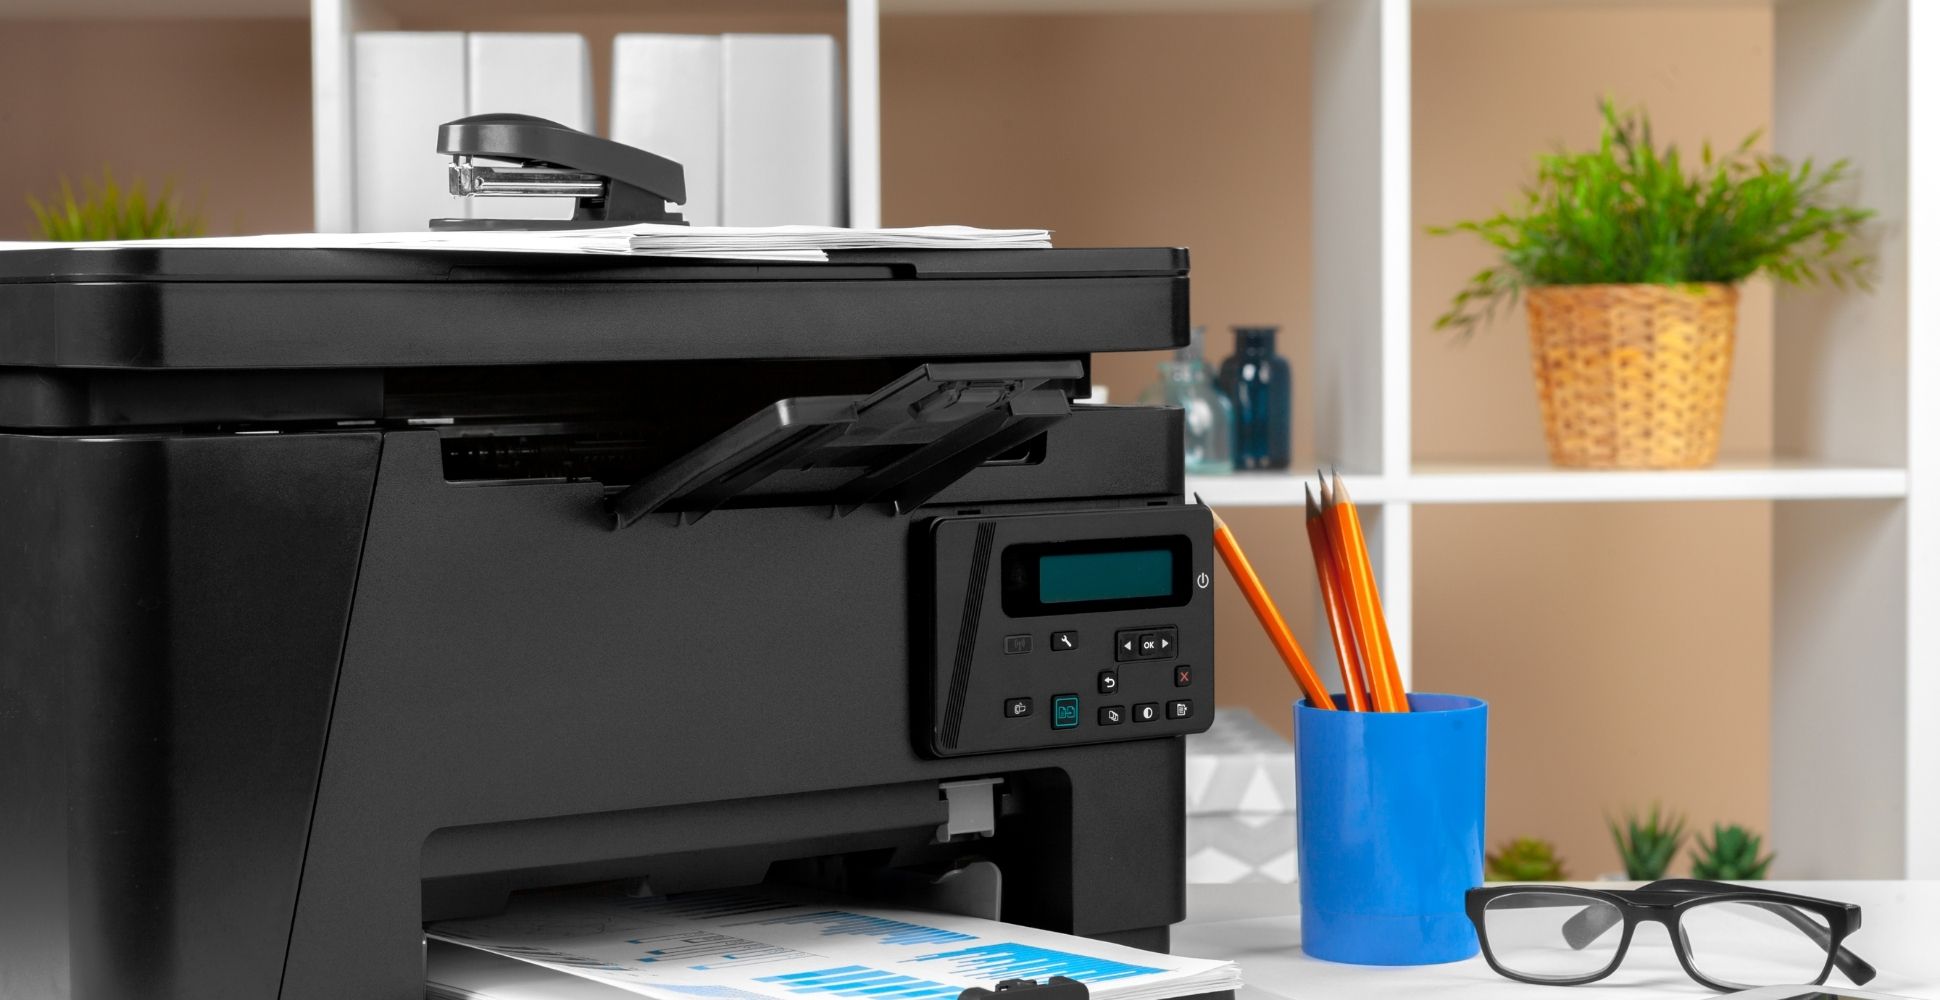 4 Best Printers For Home Use (2022 Review) | Spruce Up!